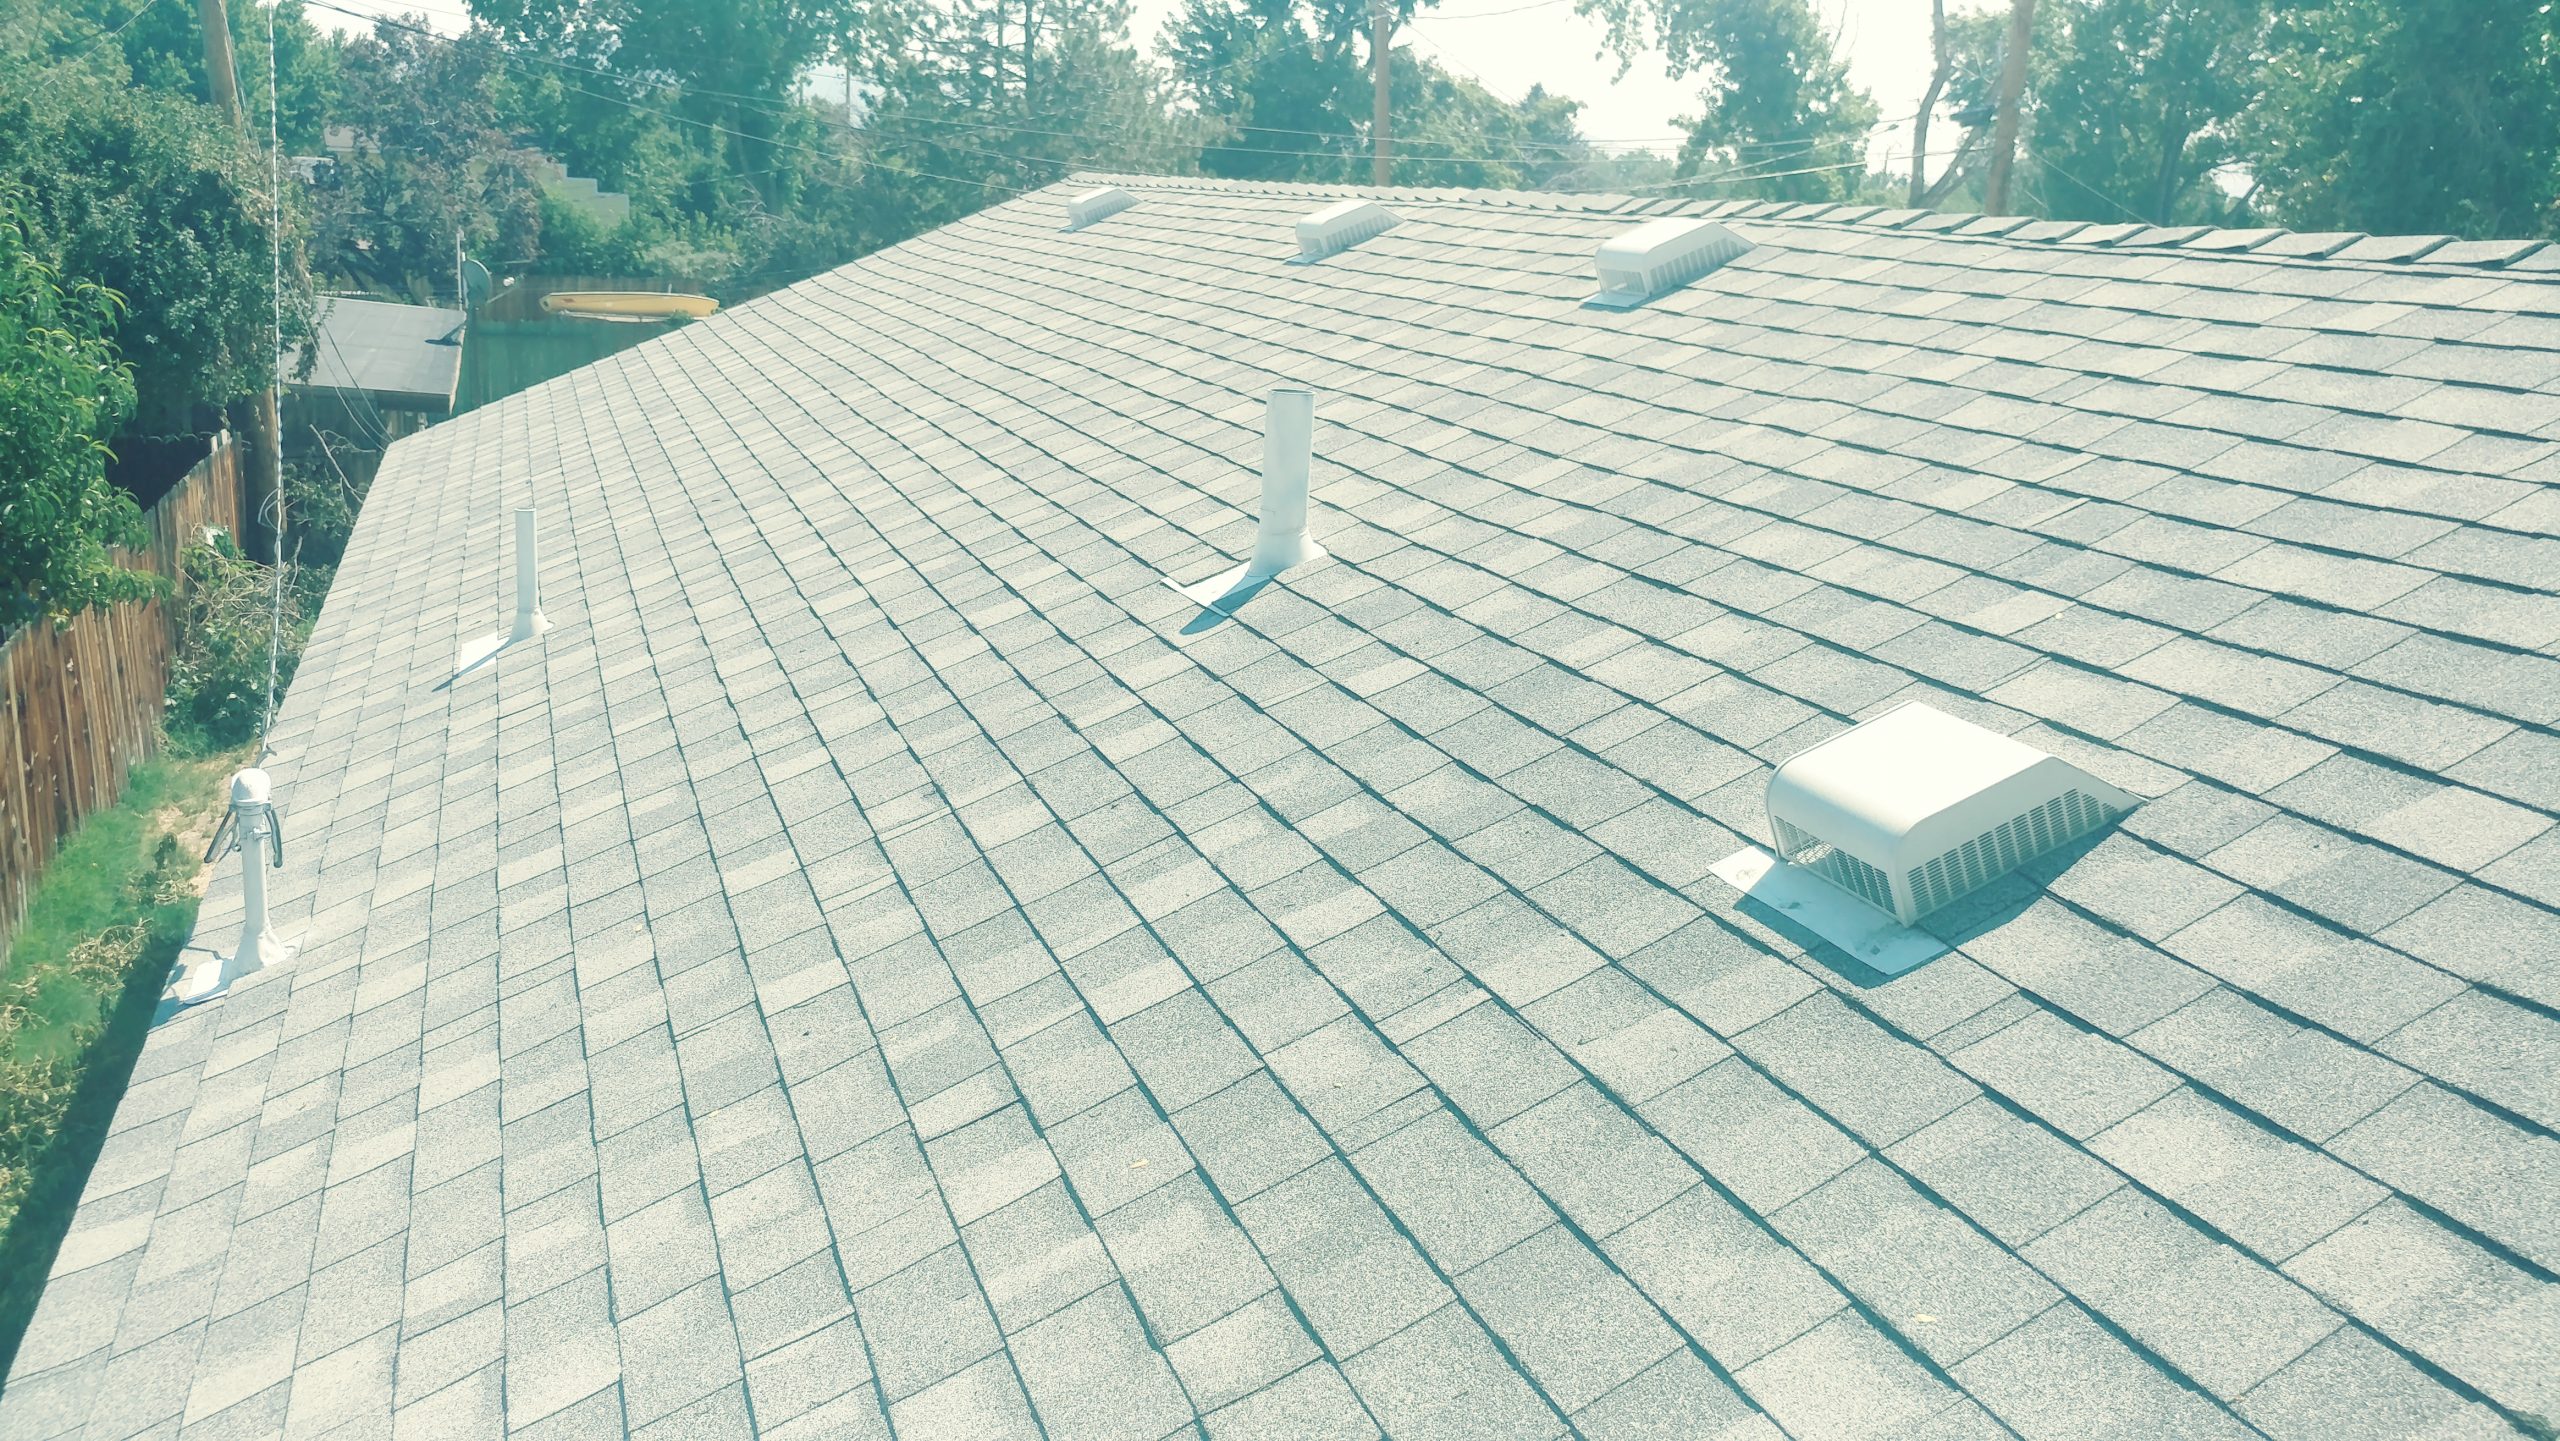 2770 14th Street Residential Roofing